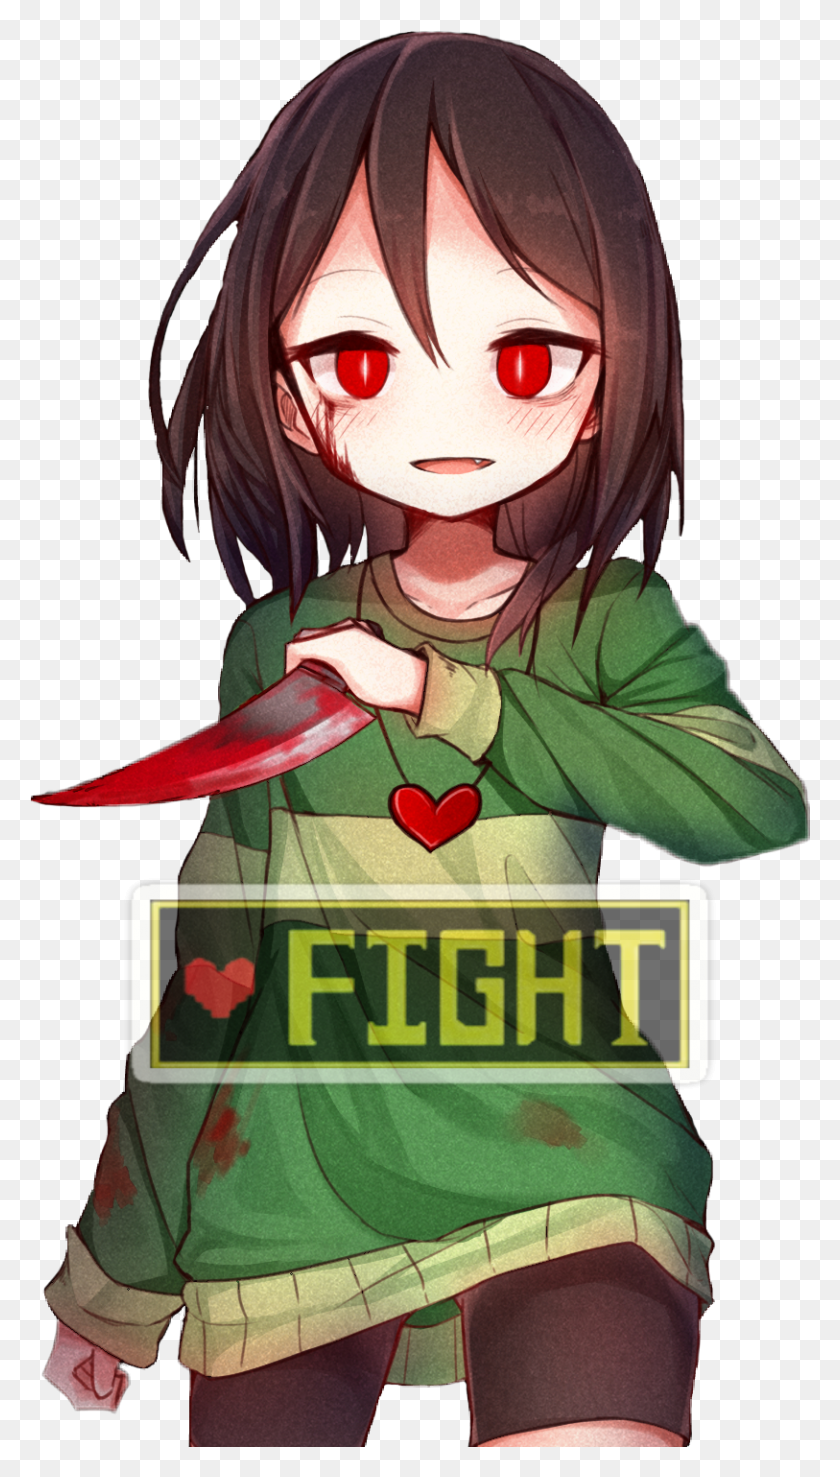 813x1477 Undertale Chara Fight Genocide Frisk And Chara, Comics, Libro, Manga Hd Png